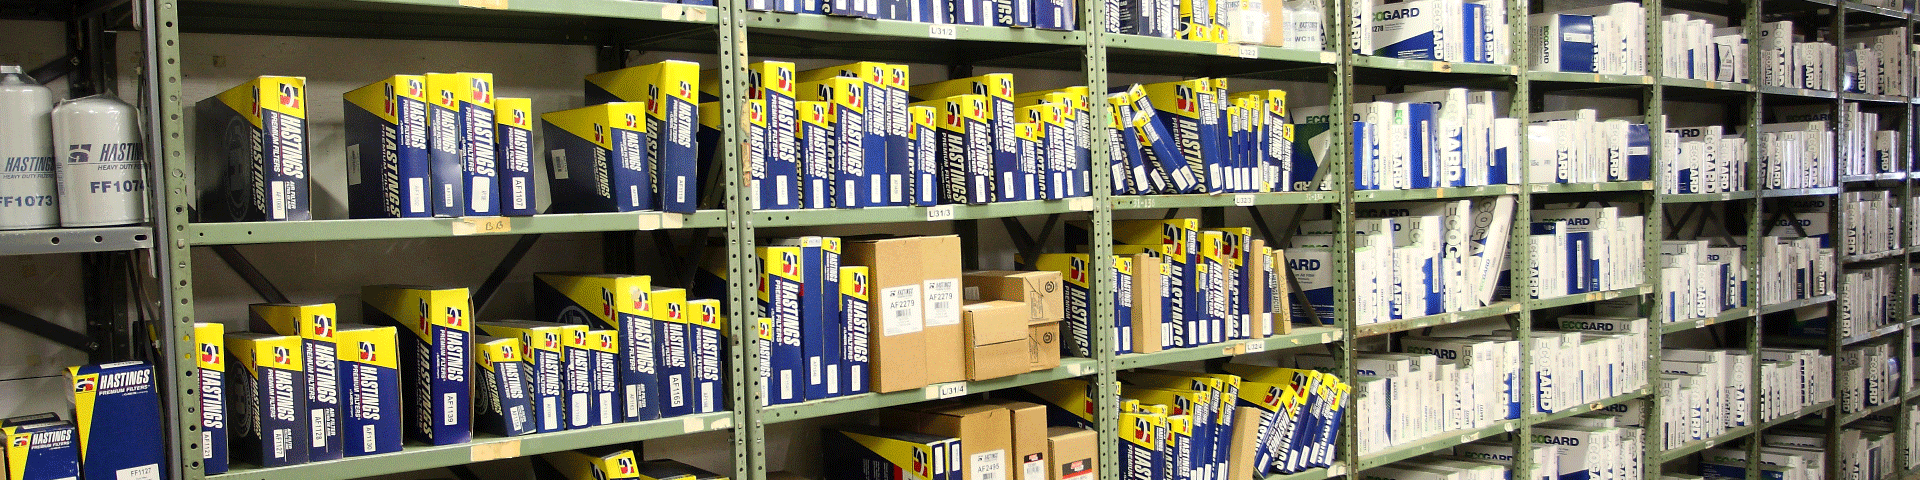 Shelves of auto parts, blue and yellow packaging. C&M Auto Parts Warehouses only stock the best names in auto parts, tools, hardware and accessories.